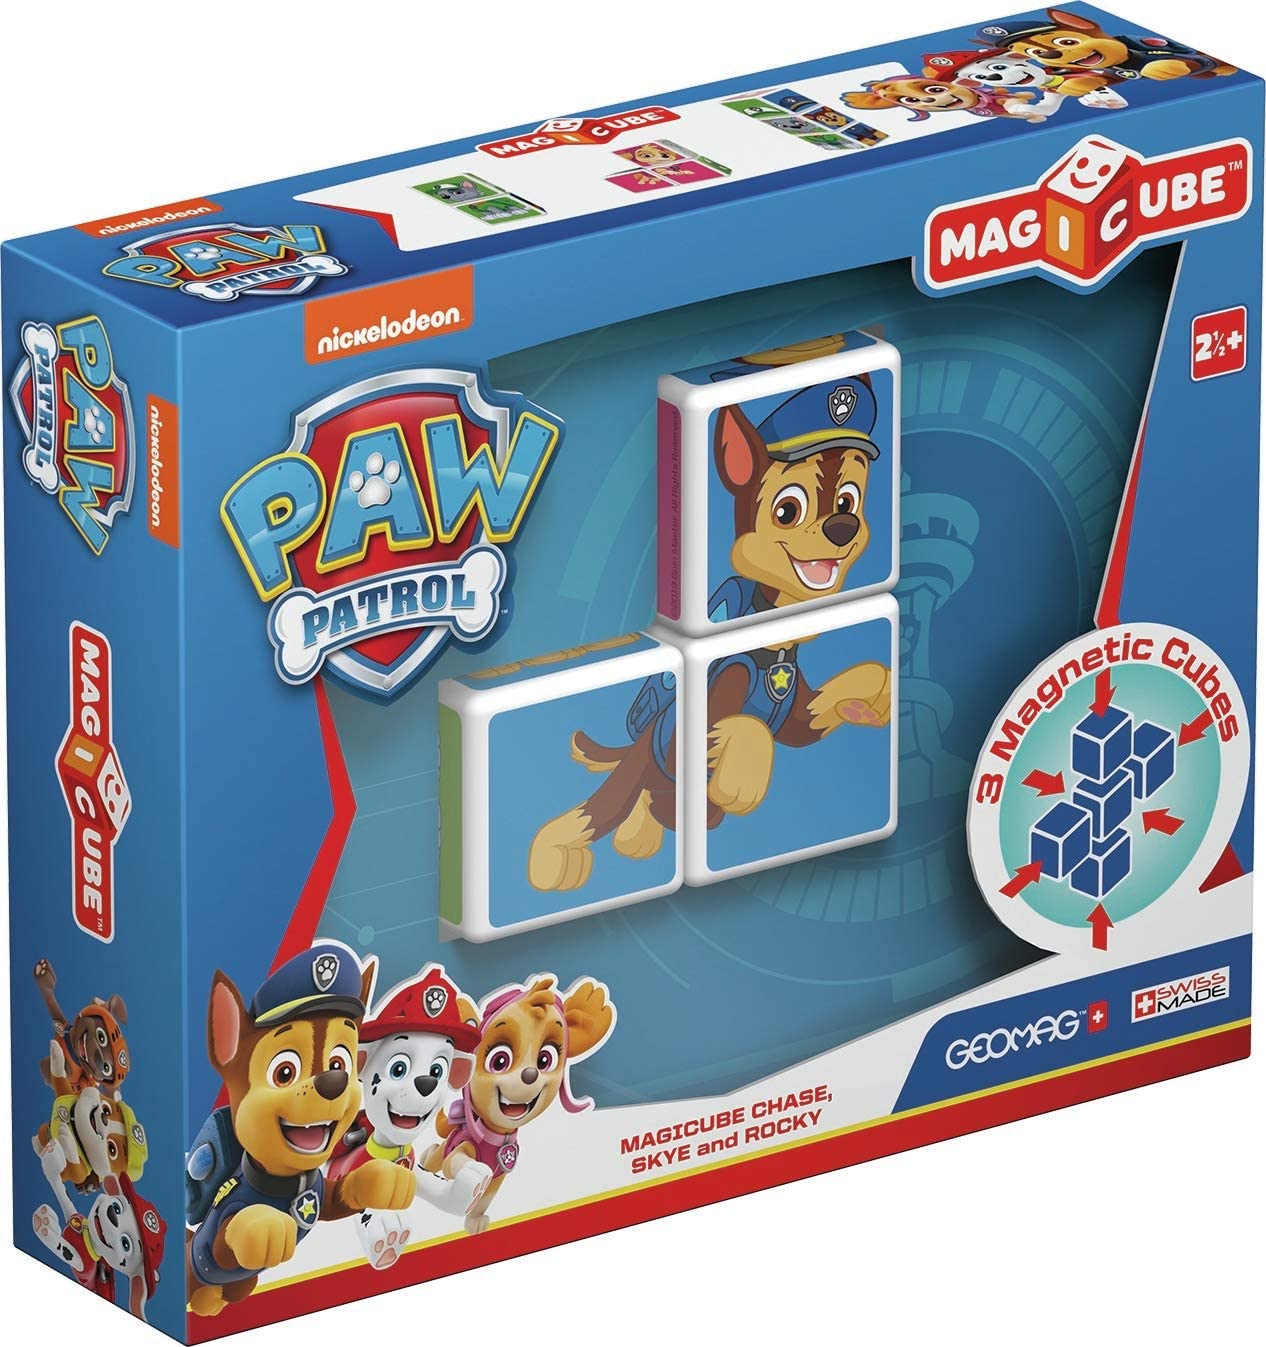 Geomag MagiCube PAW PATROL 078 Marshall, Rubble and Zuma 3 Magnetic Cubes for Constructions